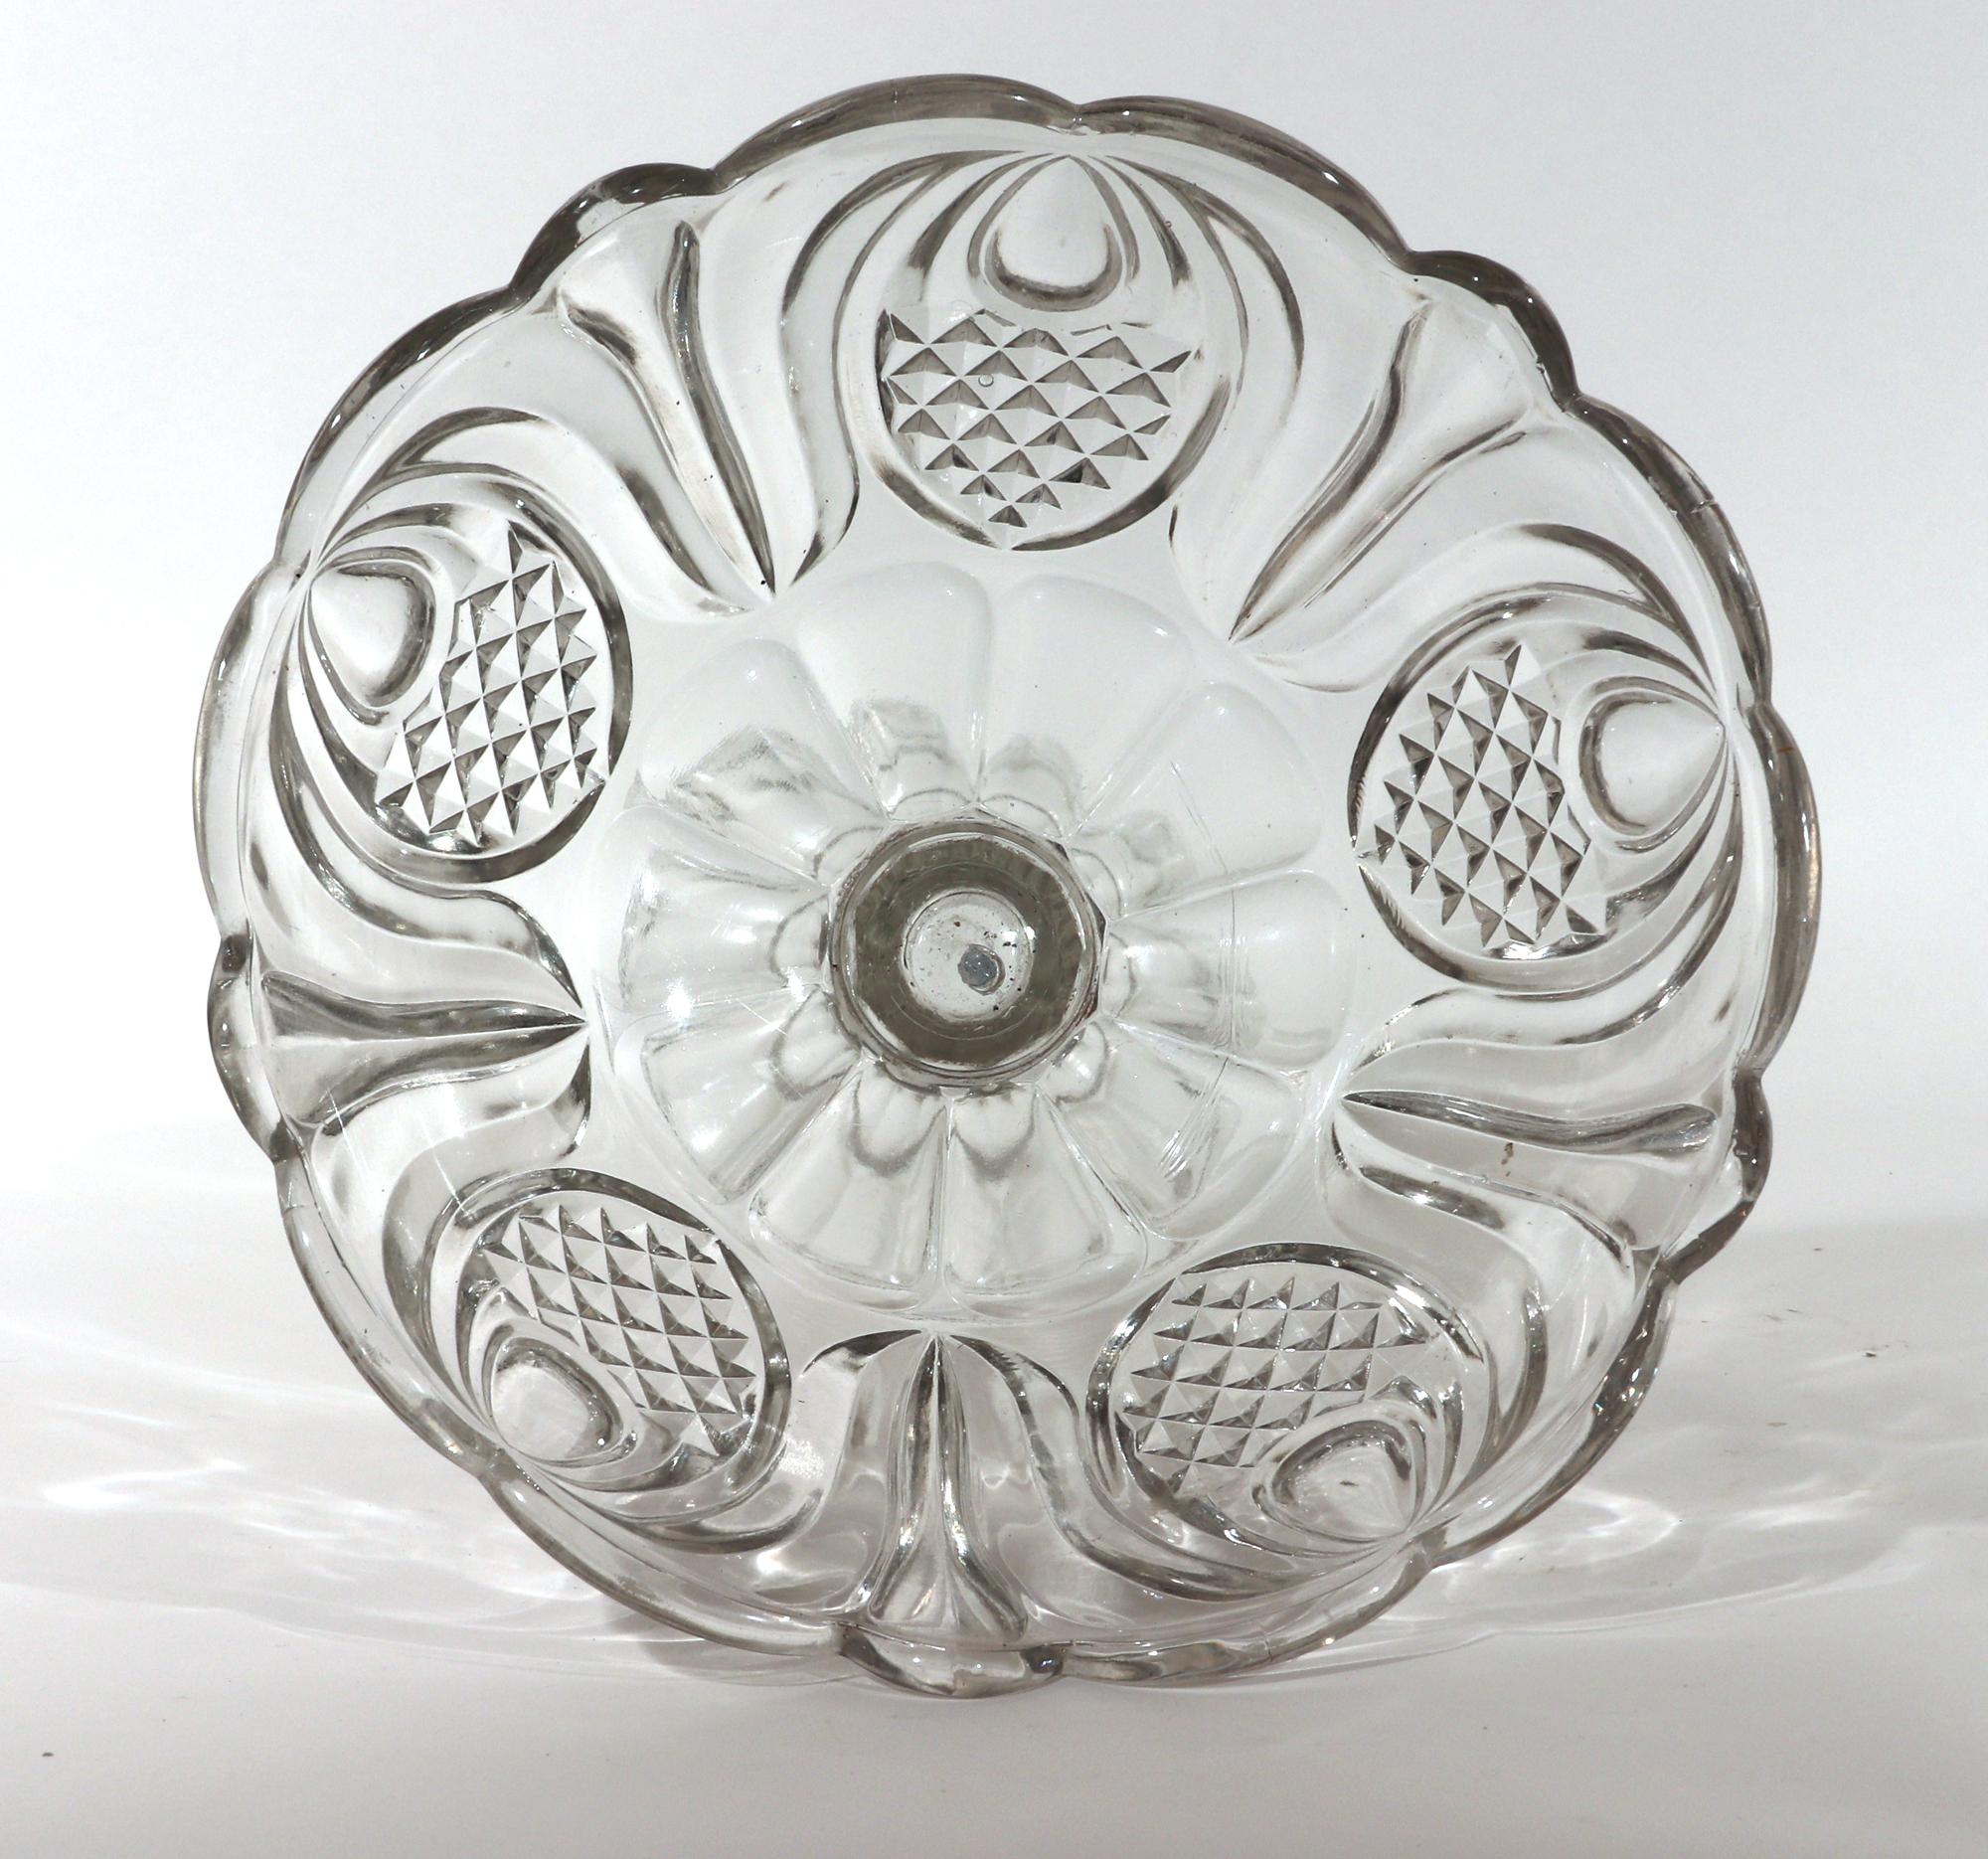 Boston & Sandwich American Pressed Glass Compote with Pineapple Pattern For Sale 4